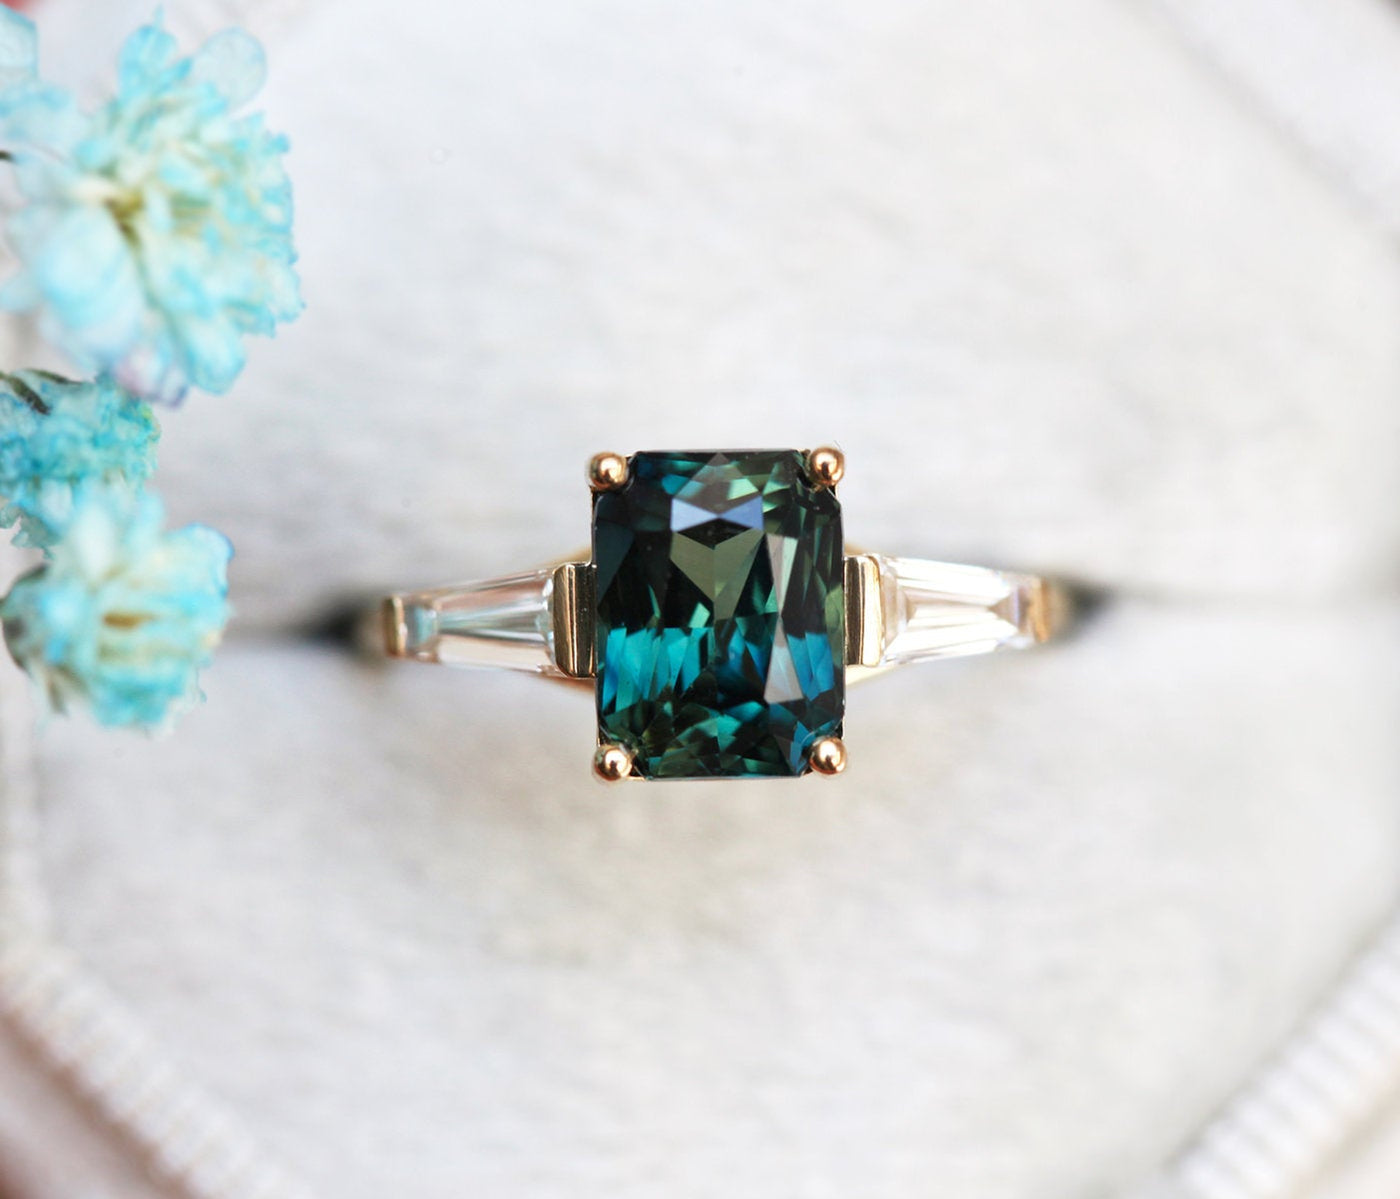 Emerald cut teal sapphire ring with baguette-shaped white diamond side stones